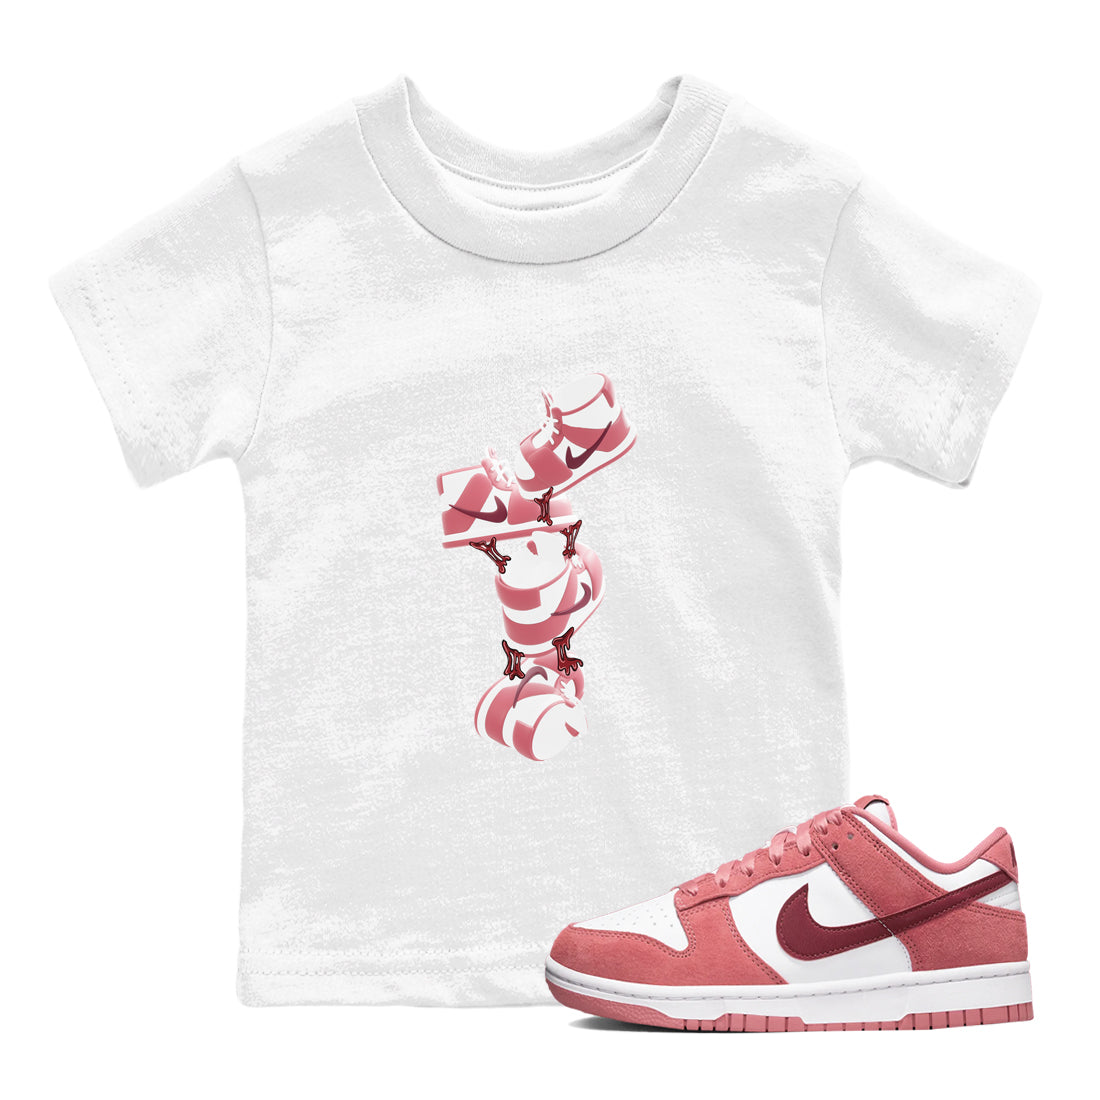 Dunk Valentines Day 2024 shirt to match jordans Gum Stuck On Shoes sneaker tees Dunk Happy Valentines Day 2024 SNRT Sneaker Release Tees Baby Toddler White 1 T-Shirt